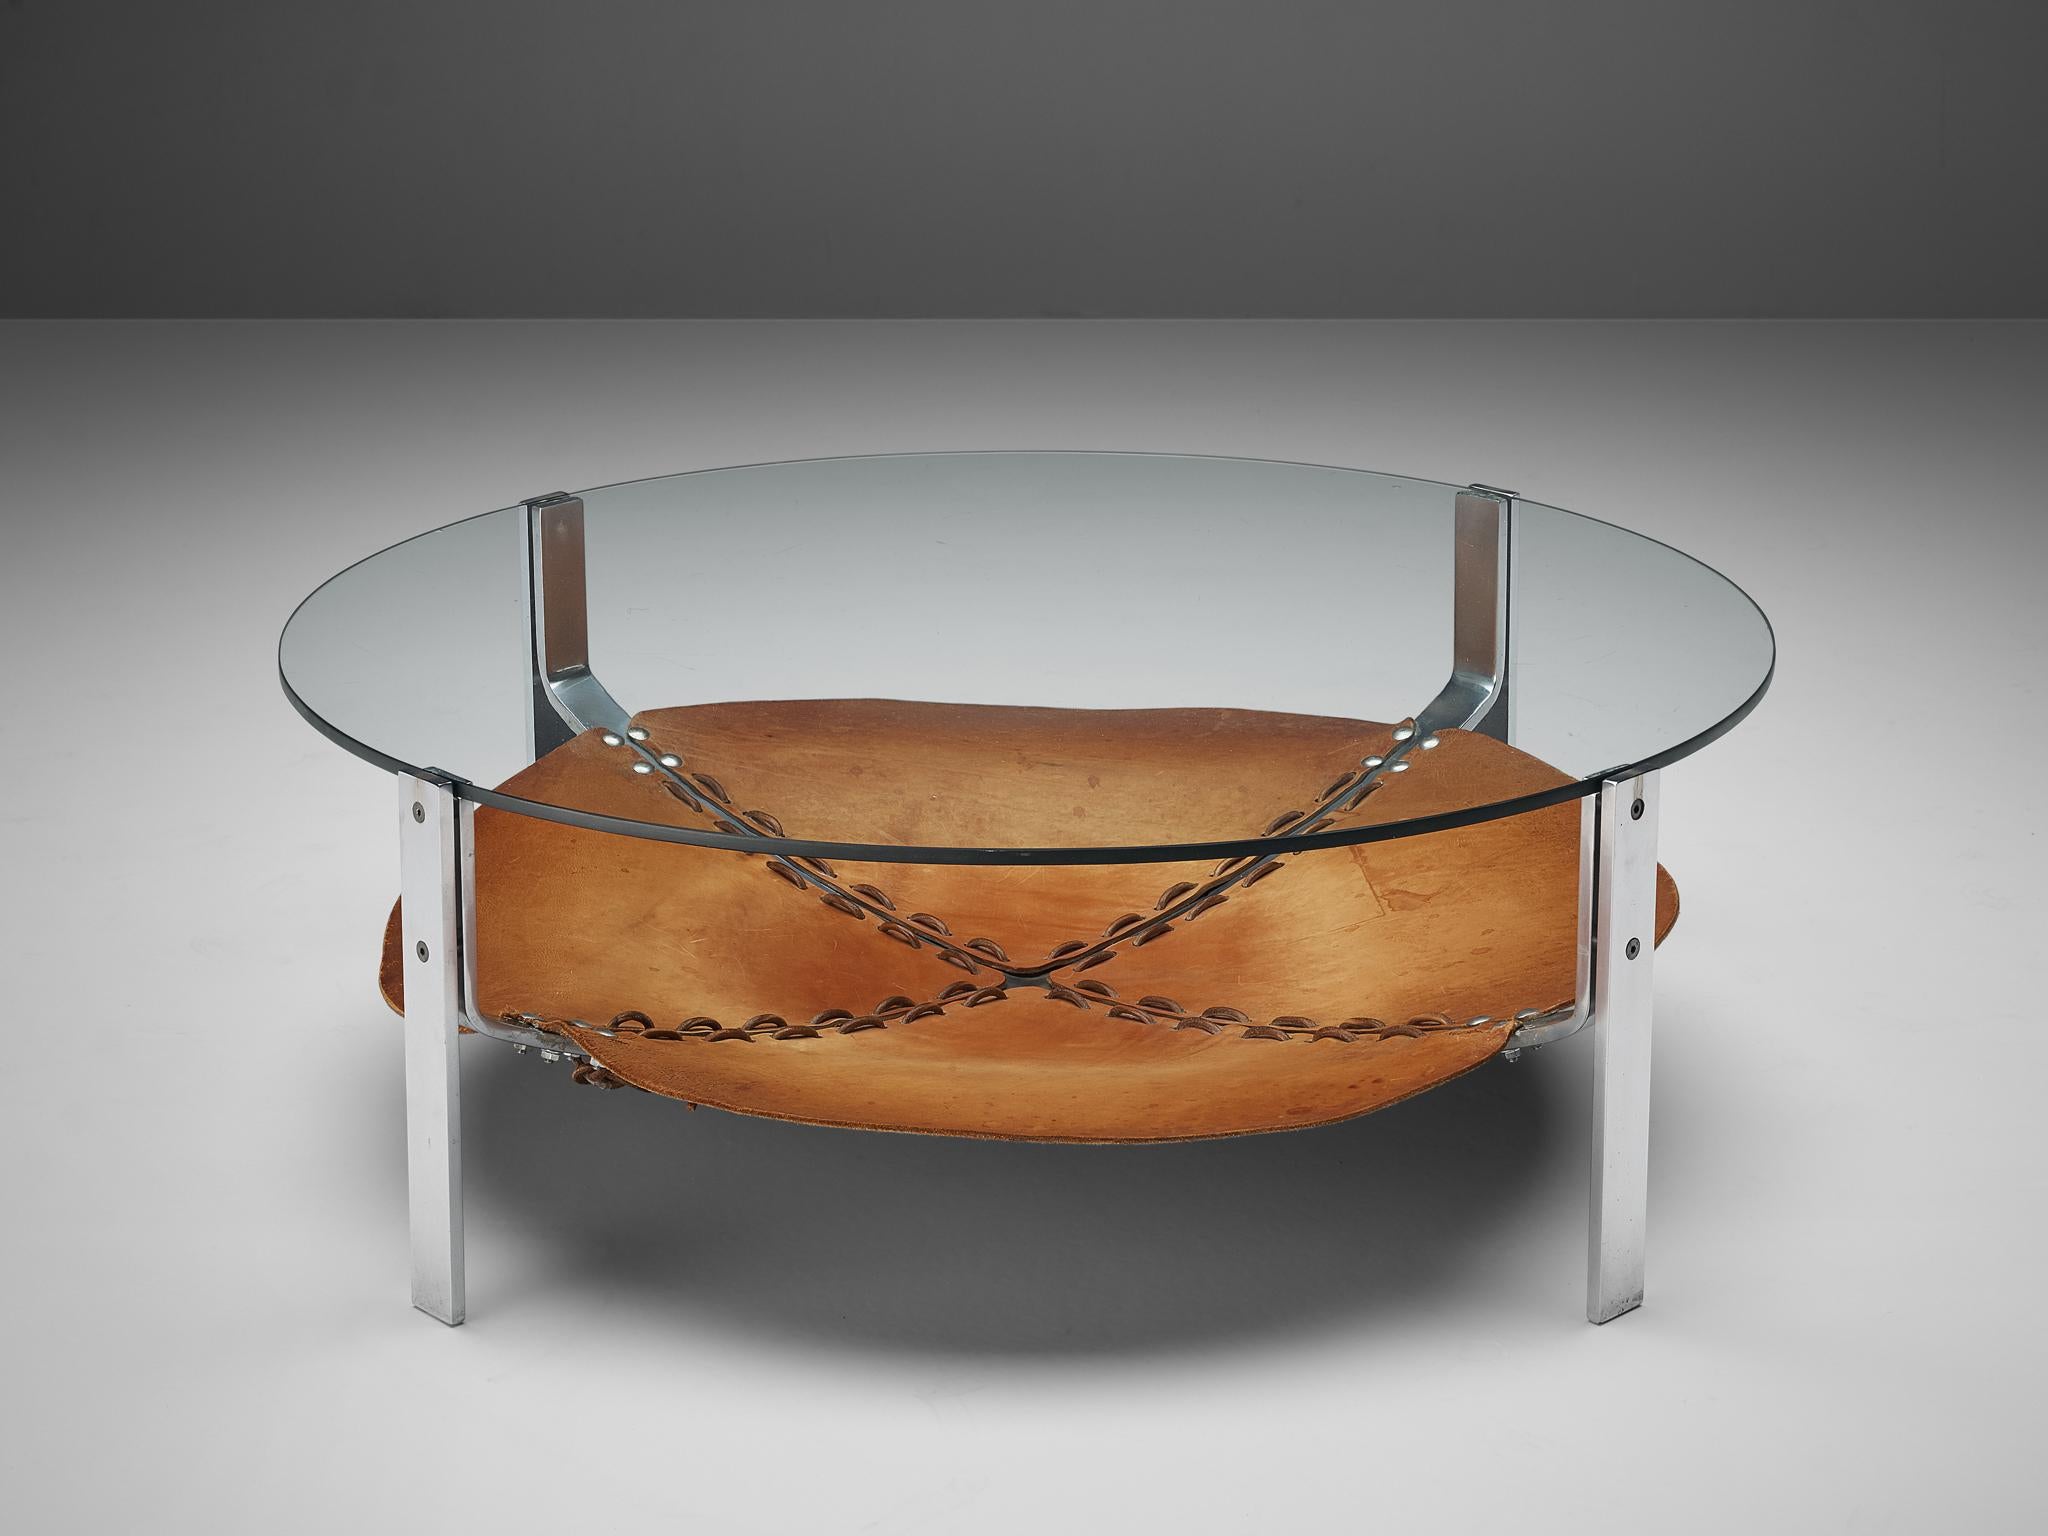 Round coffee table, steel, leather, glass, the Netherlands, 1970s

This round coffee table consist out of a metal structure building the four legs. On the level below the glass tabletop a beautifully patinated cognac leather 'shelve' is created,